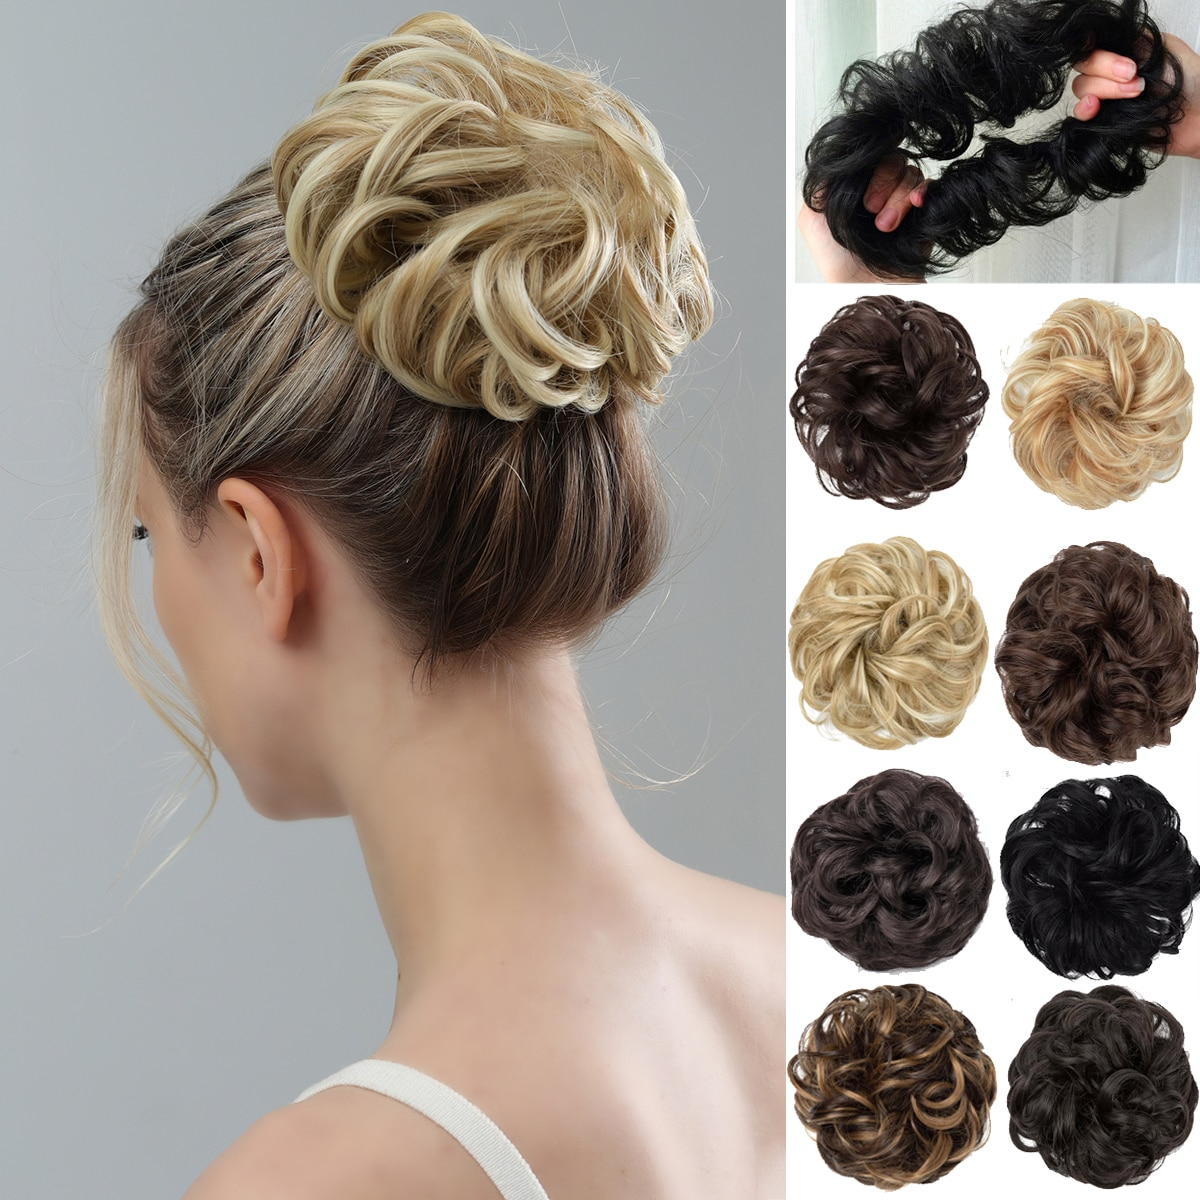 001# 6 Inch Synthetic Hair Bun Extensions Messy Curly Elastic Hair Scrunchies Hairpieces Chignon Donut Updo Hair Pieces for Women